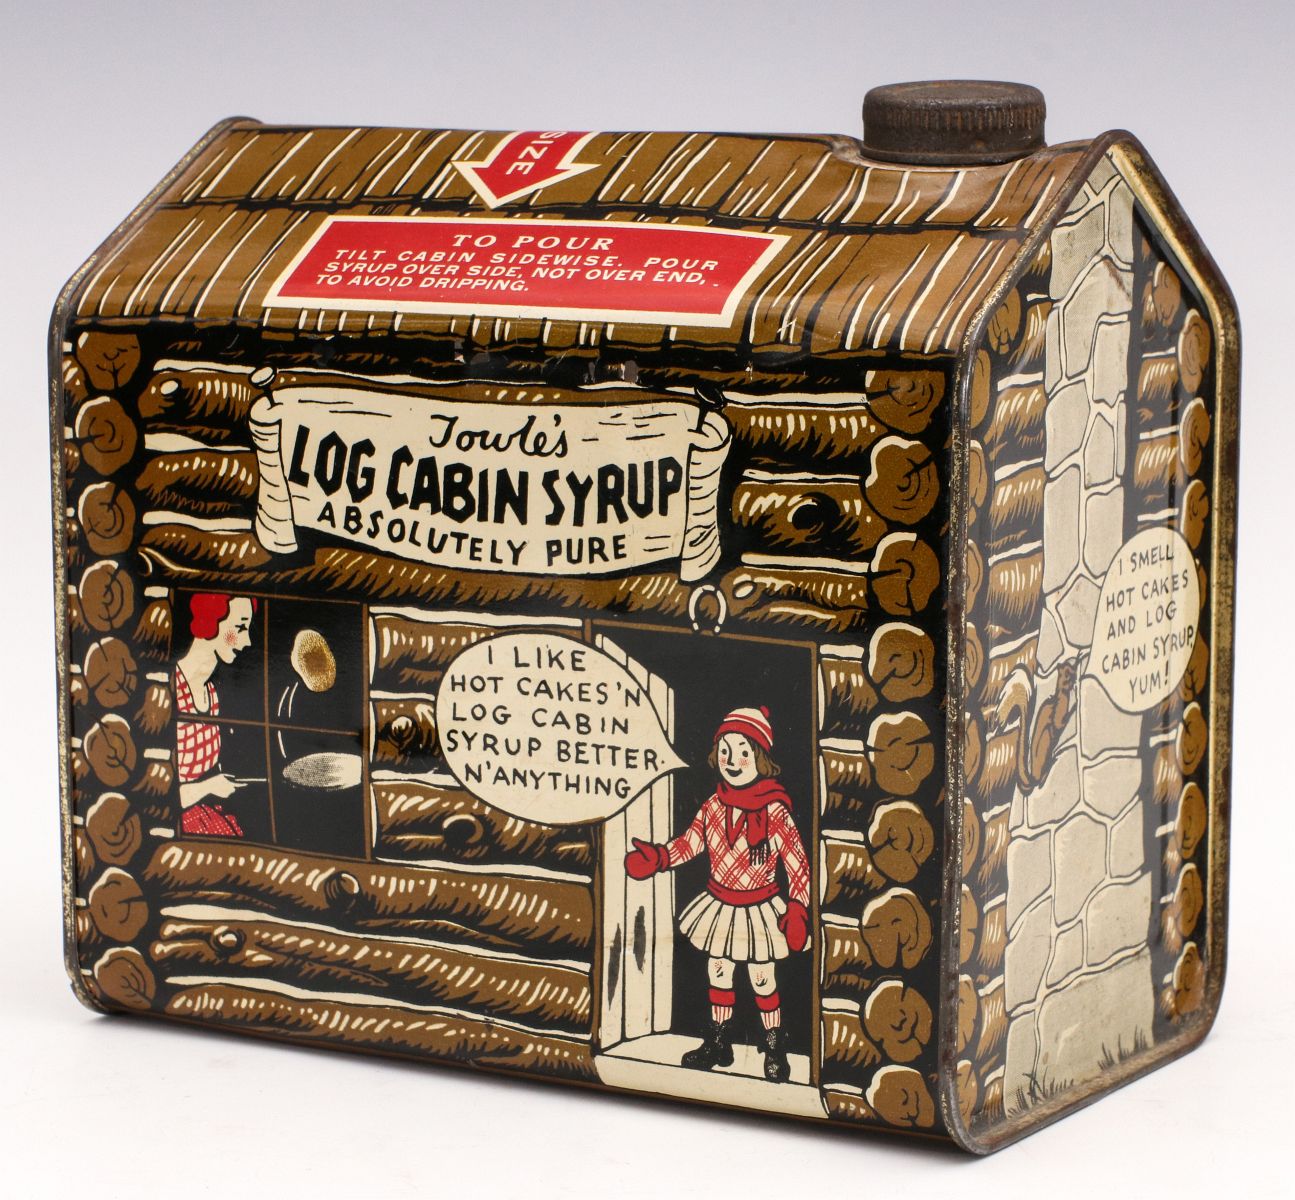 A TOWLE'S LOG CABIN SYRUP FIVE-POUND TIN